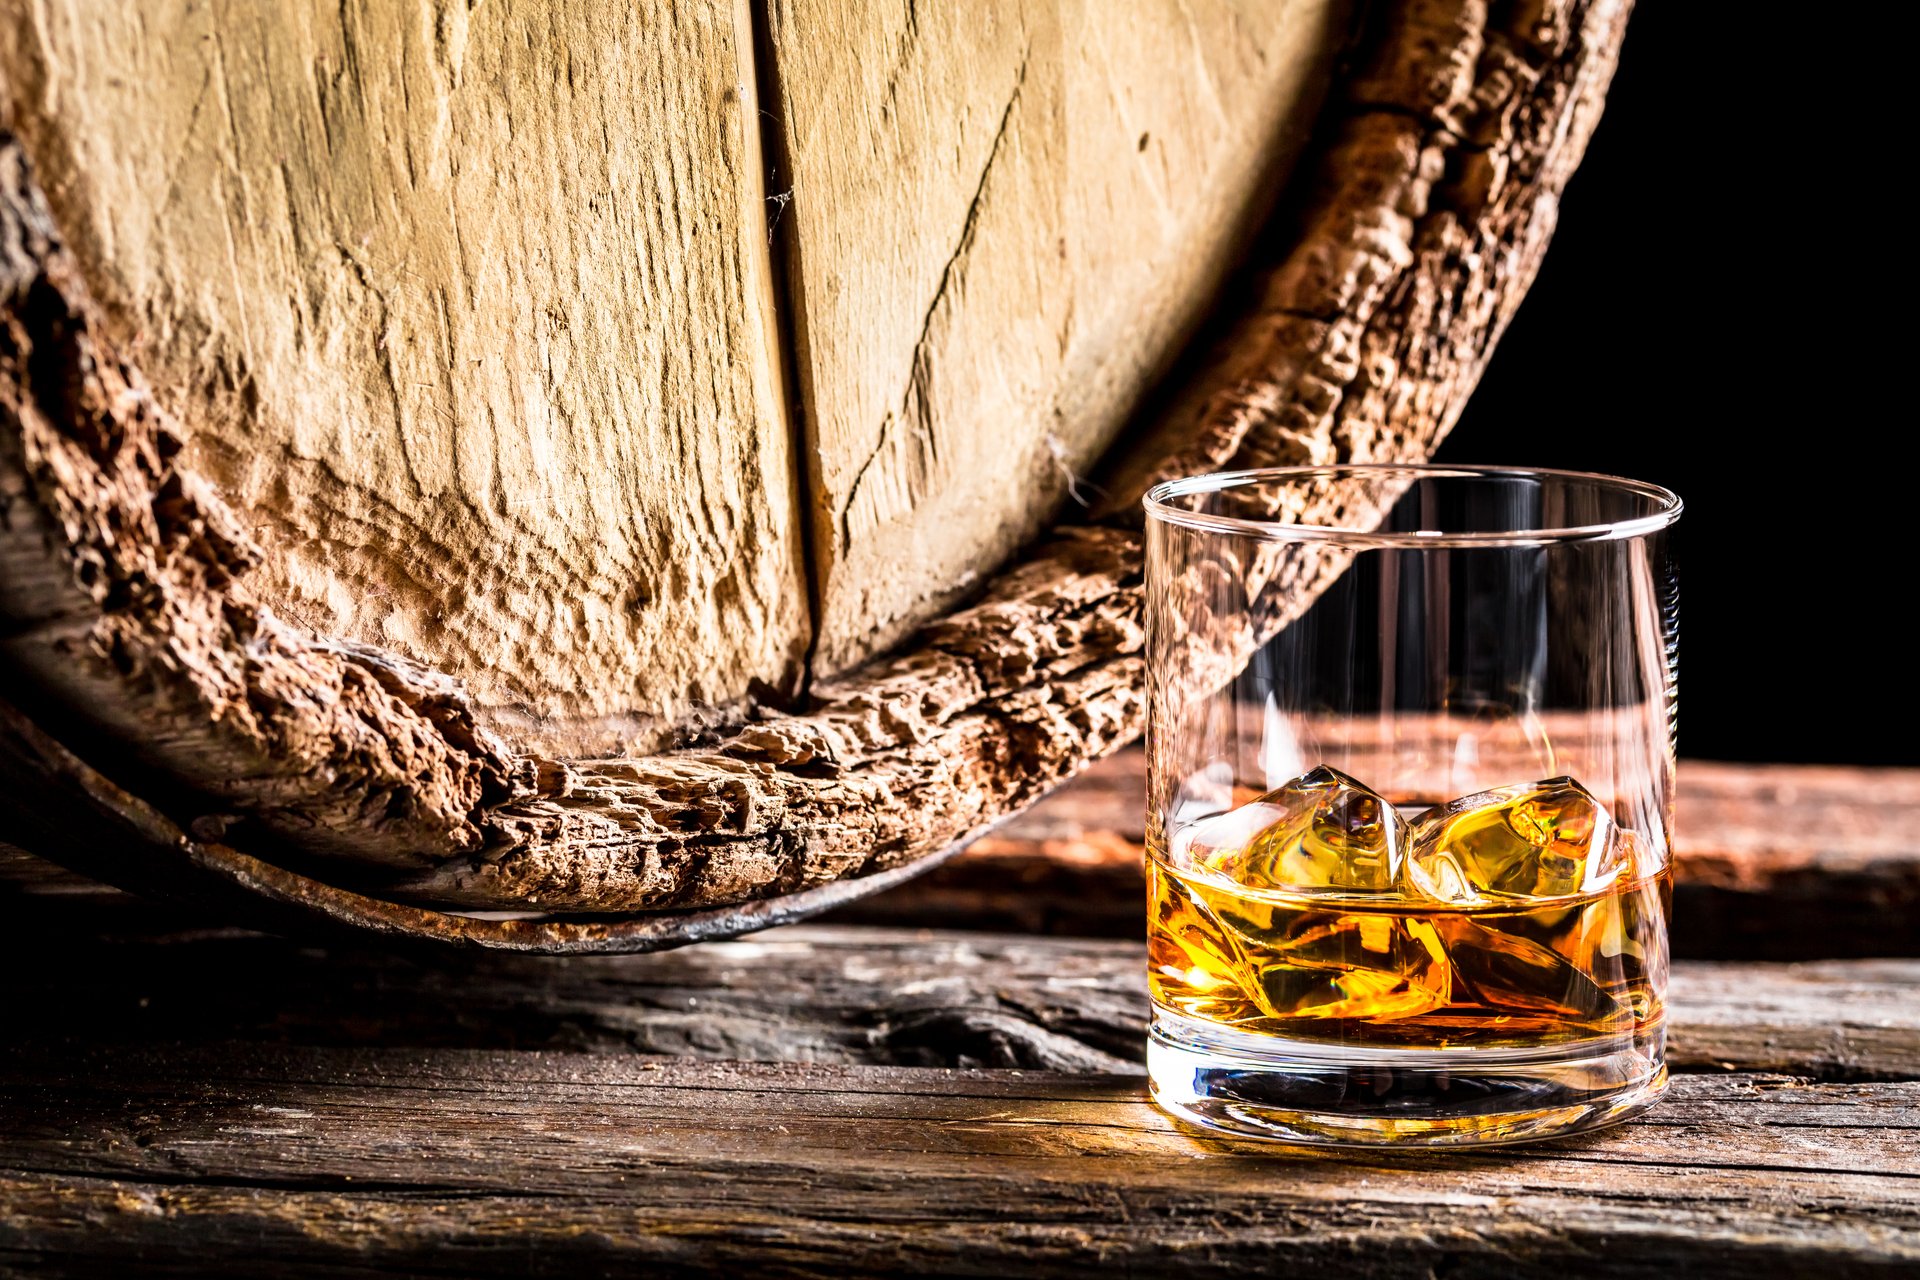 Oak casks&nbsp;are durable and can contain&nbsp;whisky&nbsp;for a long time